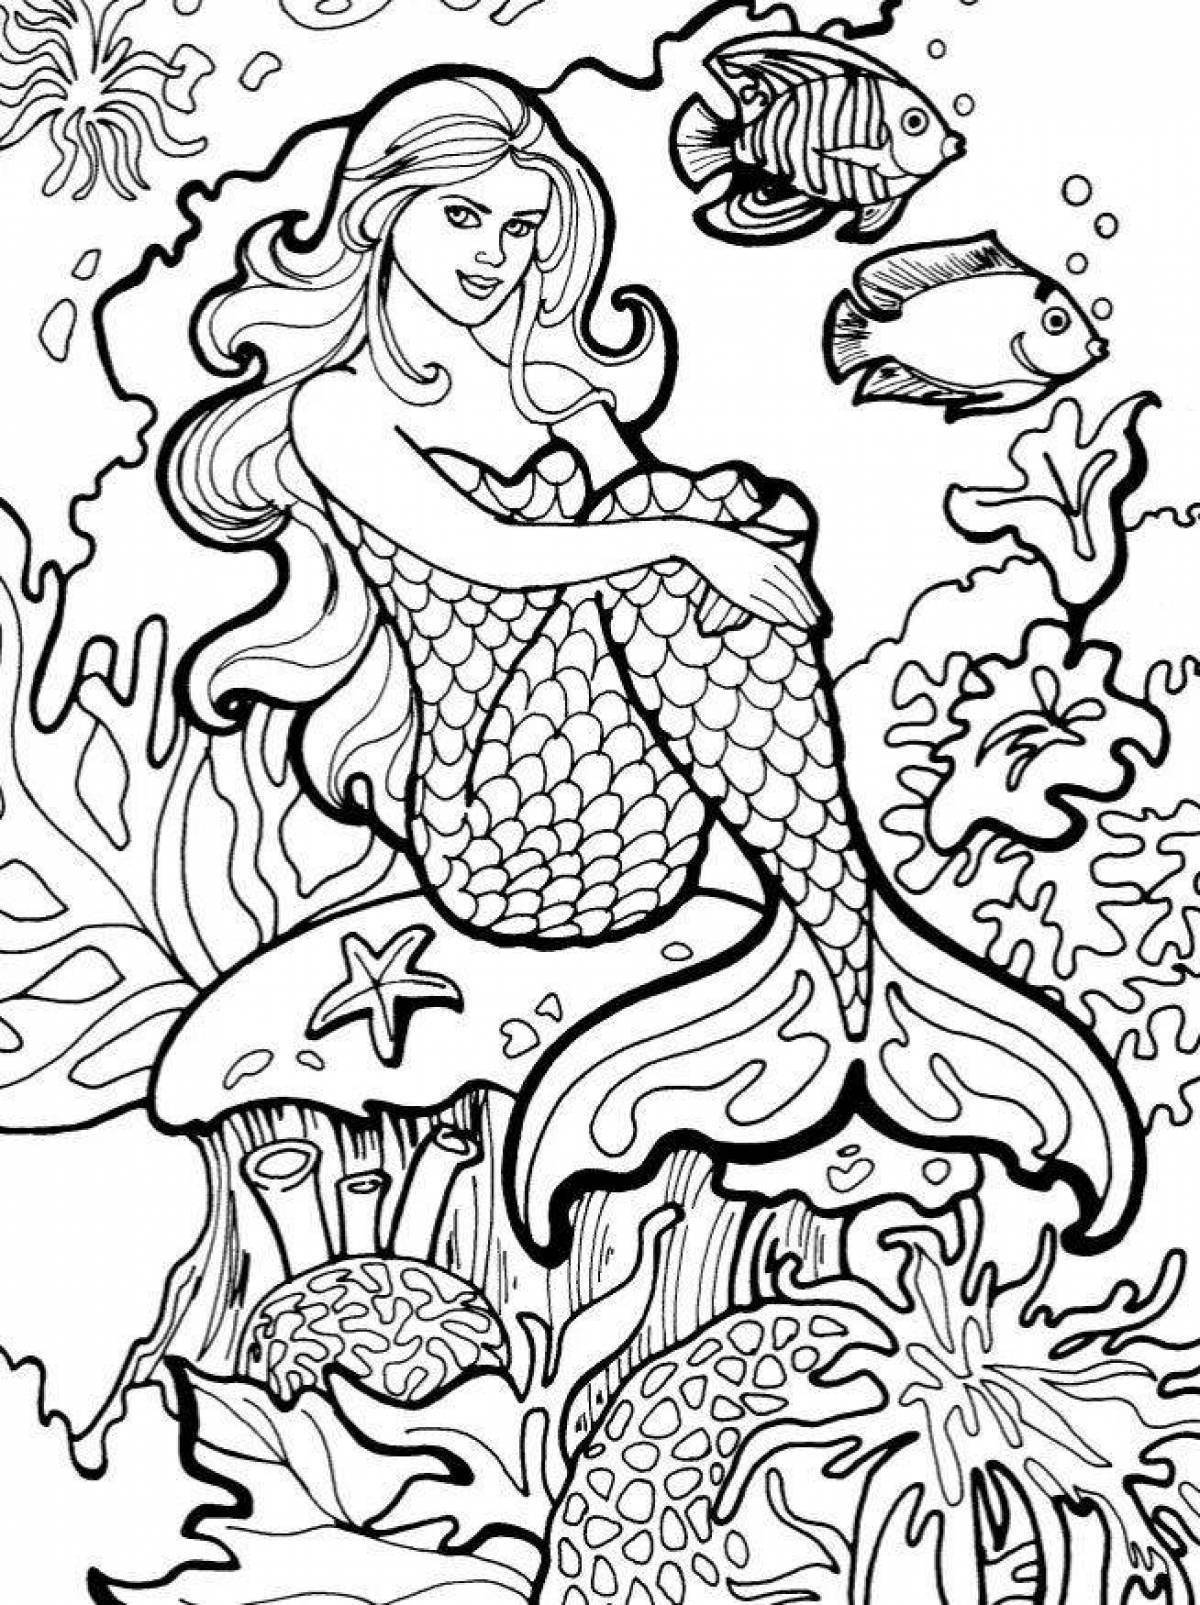 Mystical coloring book relaxation antistress for adults